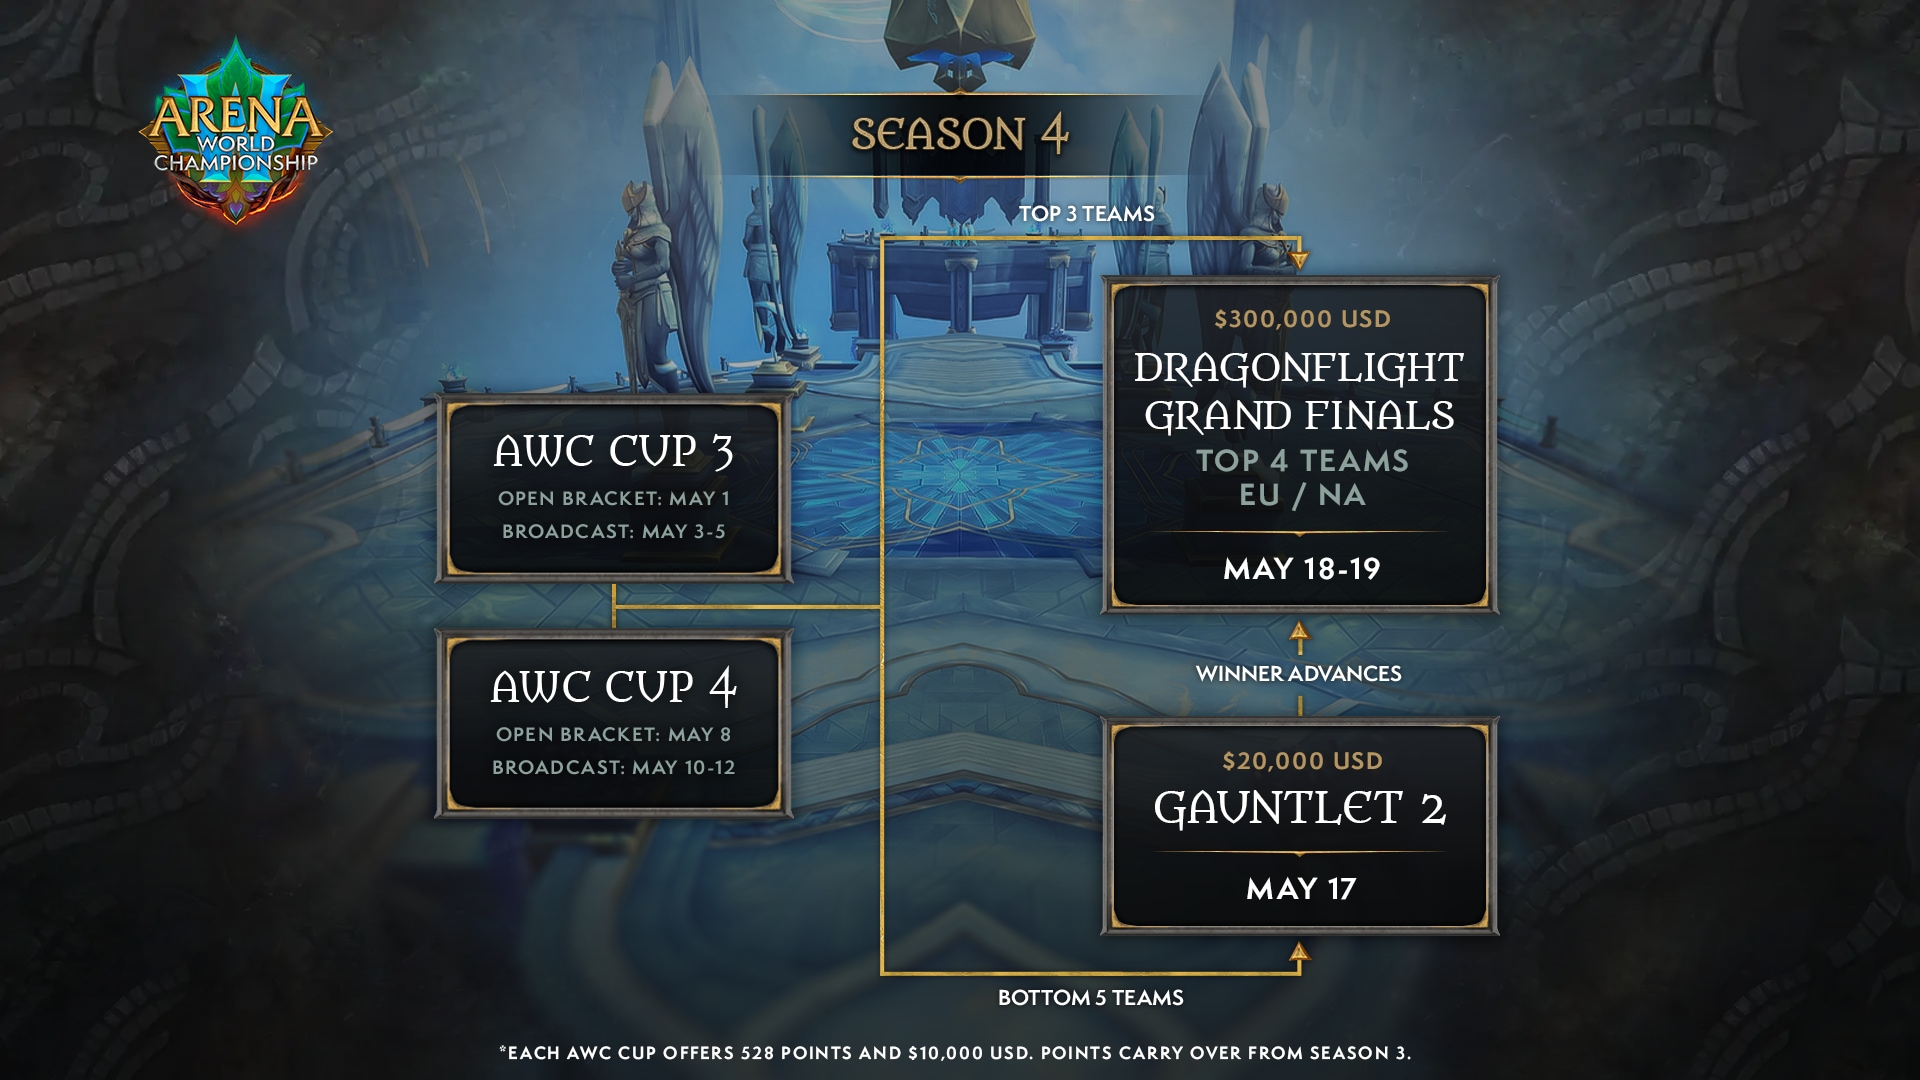 Image showing the overall structure of the Arena World Championship in Dragonflight Season 4. AWC Season 4 continues from Season 3, with Cup 3 starting May 1 and Cup 4 May 8. The Dragonflight Grand Finals round out the season on May 18-19 with $300,000 USD on the line for qualified teams.